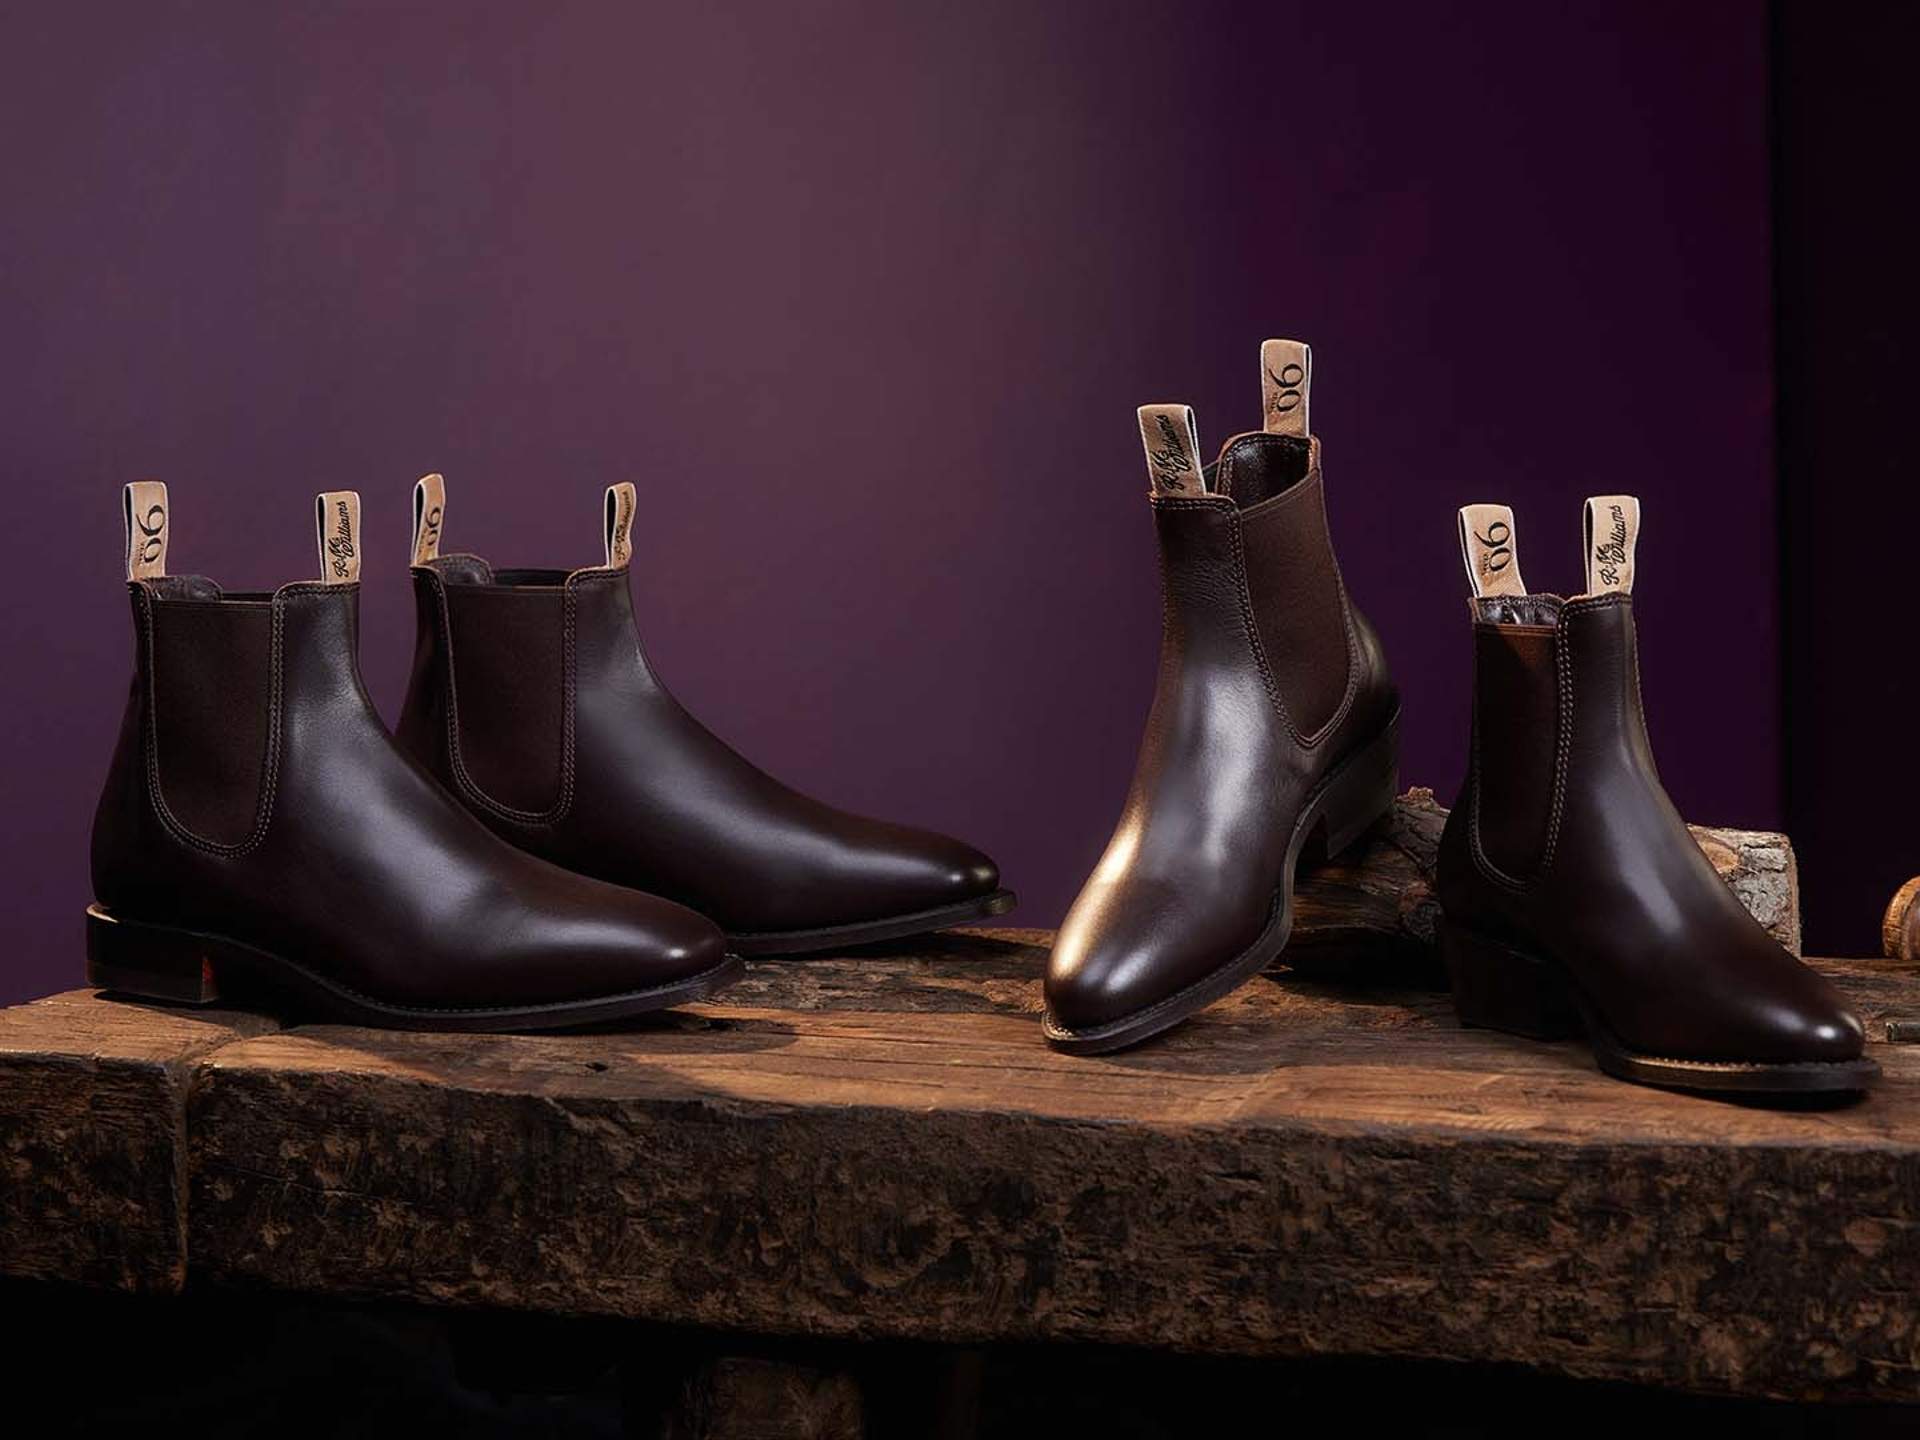 Introducing Your New Boot Crush, The R.M. Williams Adelaide